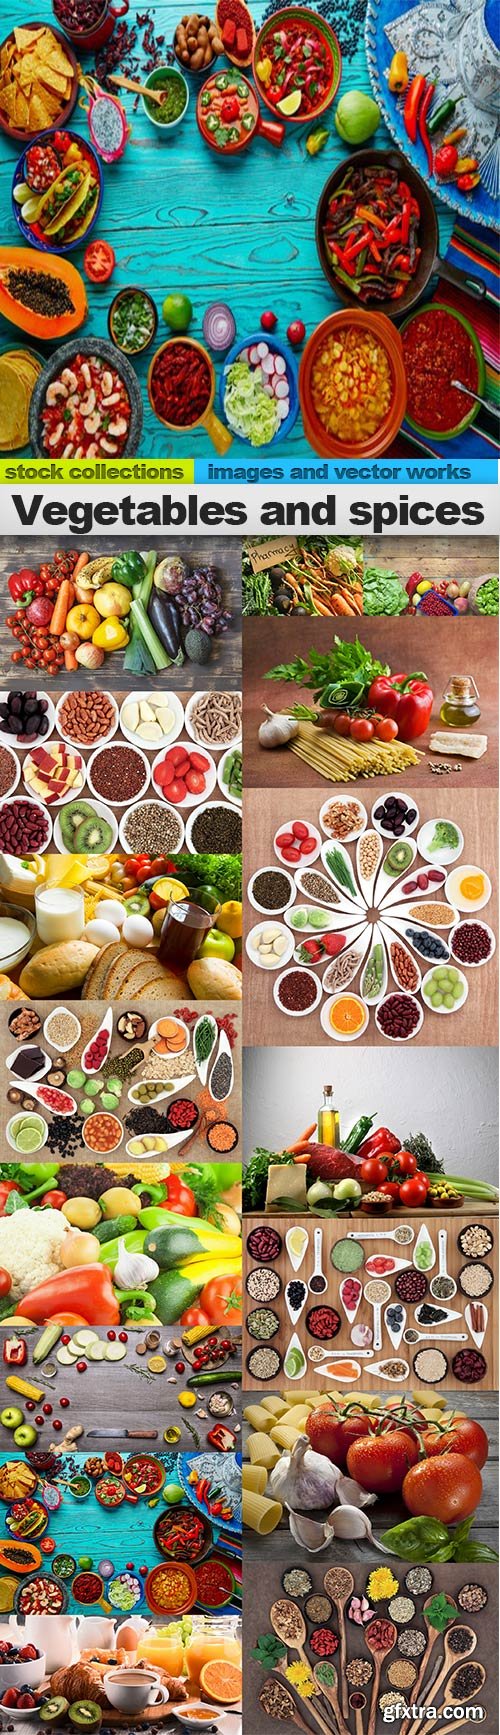 Vegetables and spices, 16 x UHQ JPEG